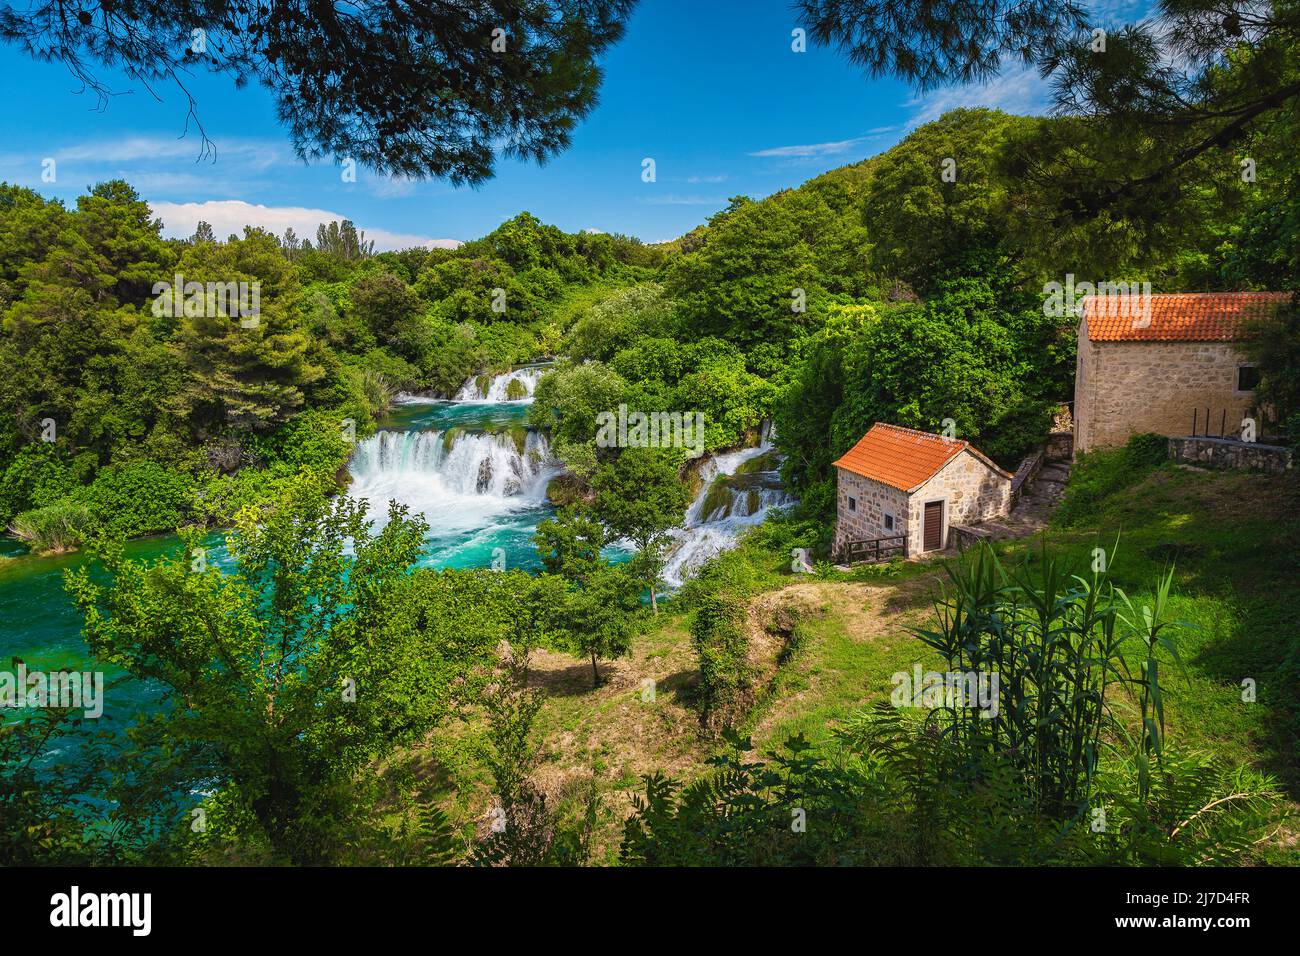 Well known mediterranean hiking and excursion place with waterfalls in the Krka National Park, Skradin touristic resort, Dalmatia, Croatia, Europe Stock Photo